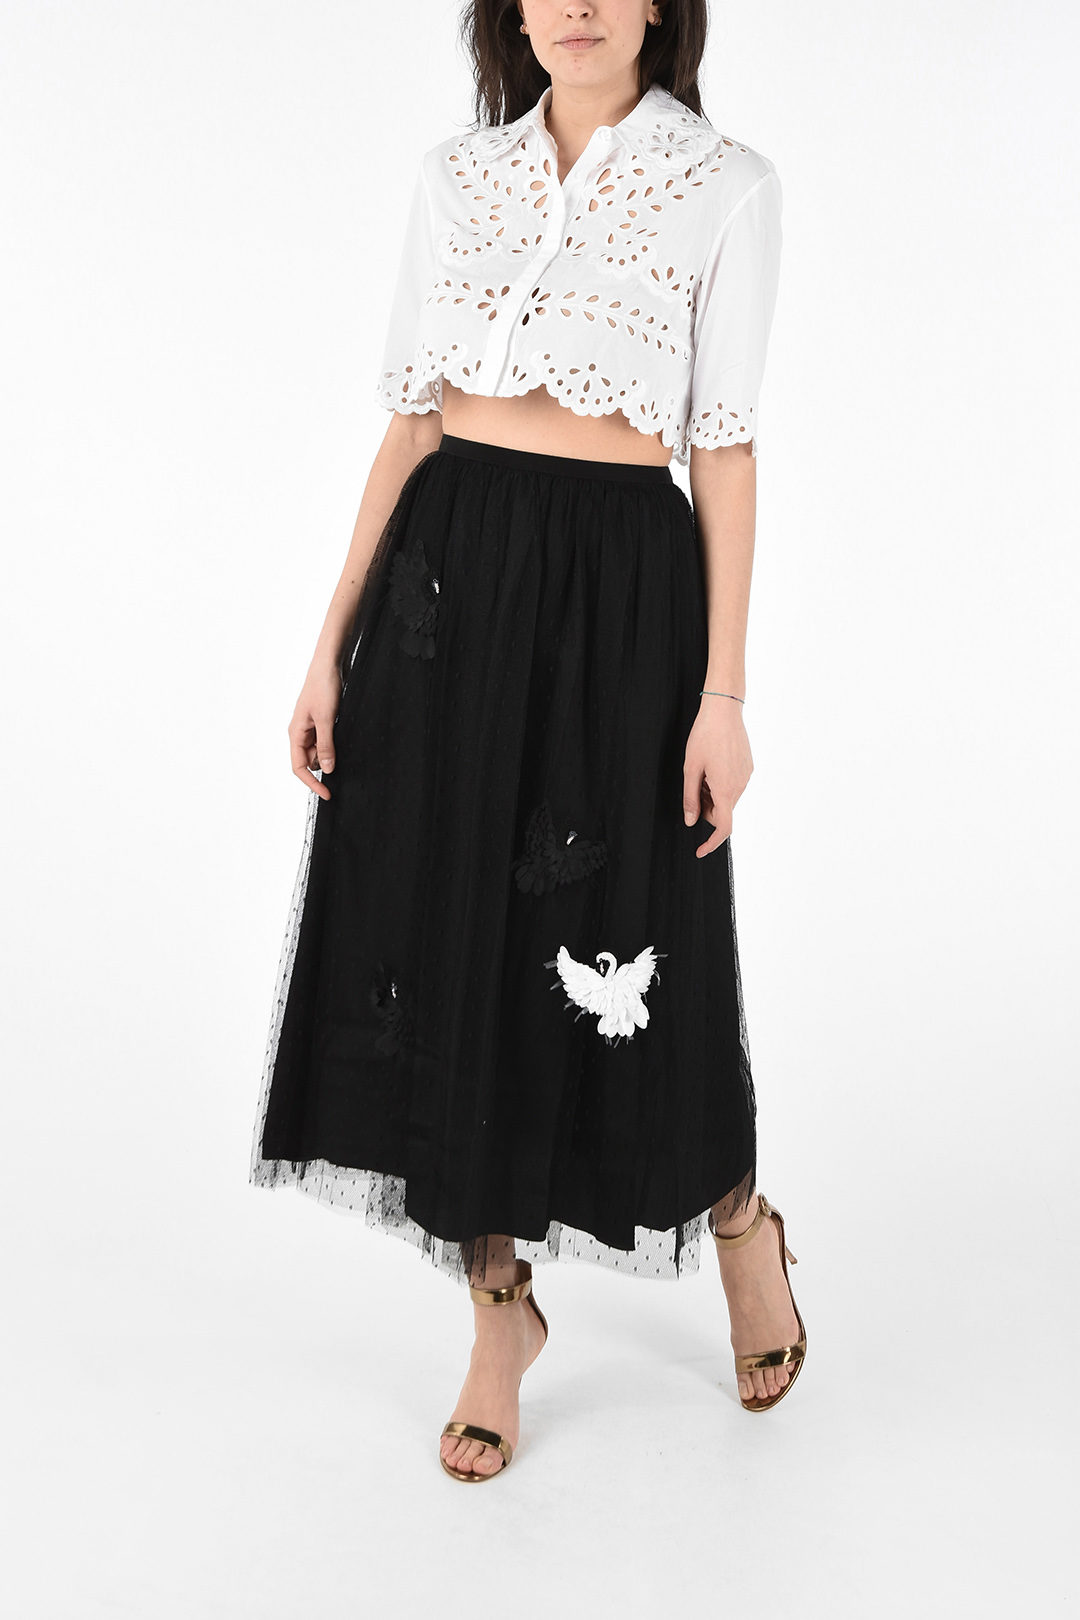 Blossom uddannelse lukke Red Valentino Tulle Flared Skirt with Swan Patch Applications women -  Glamood Outlet